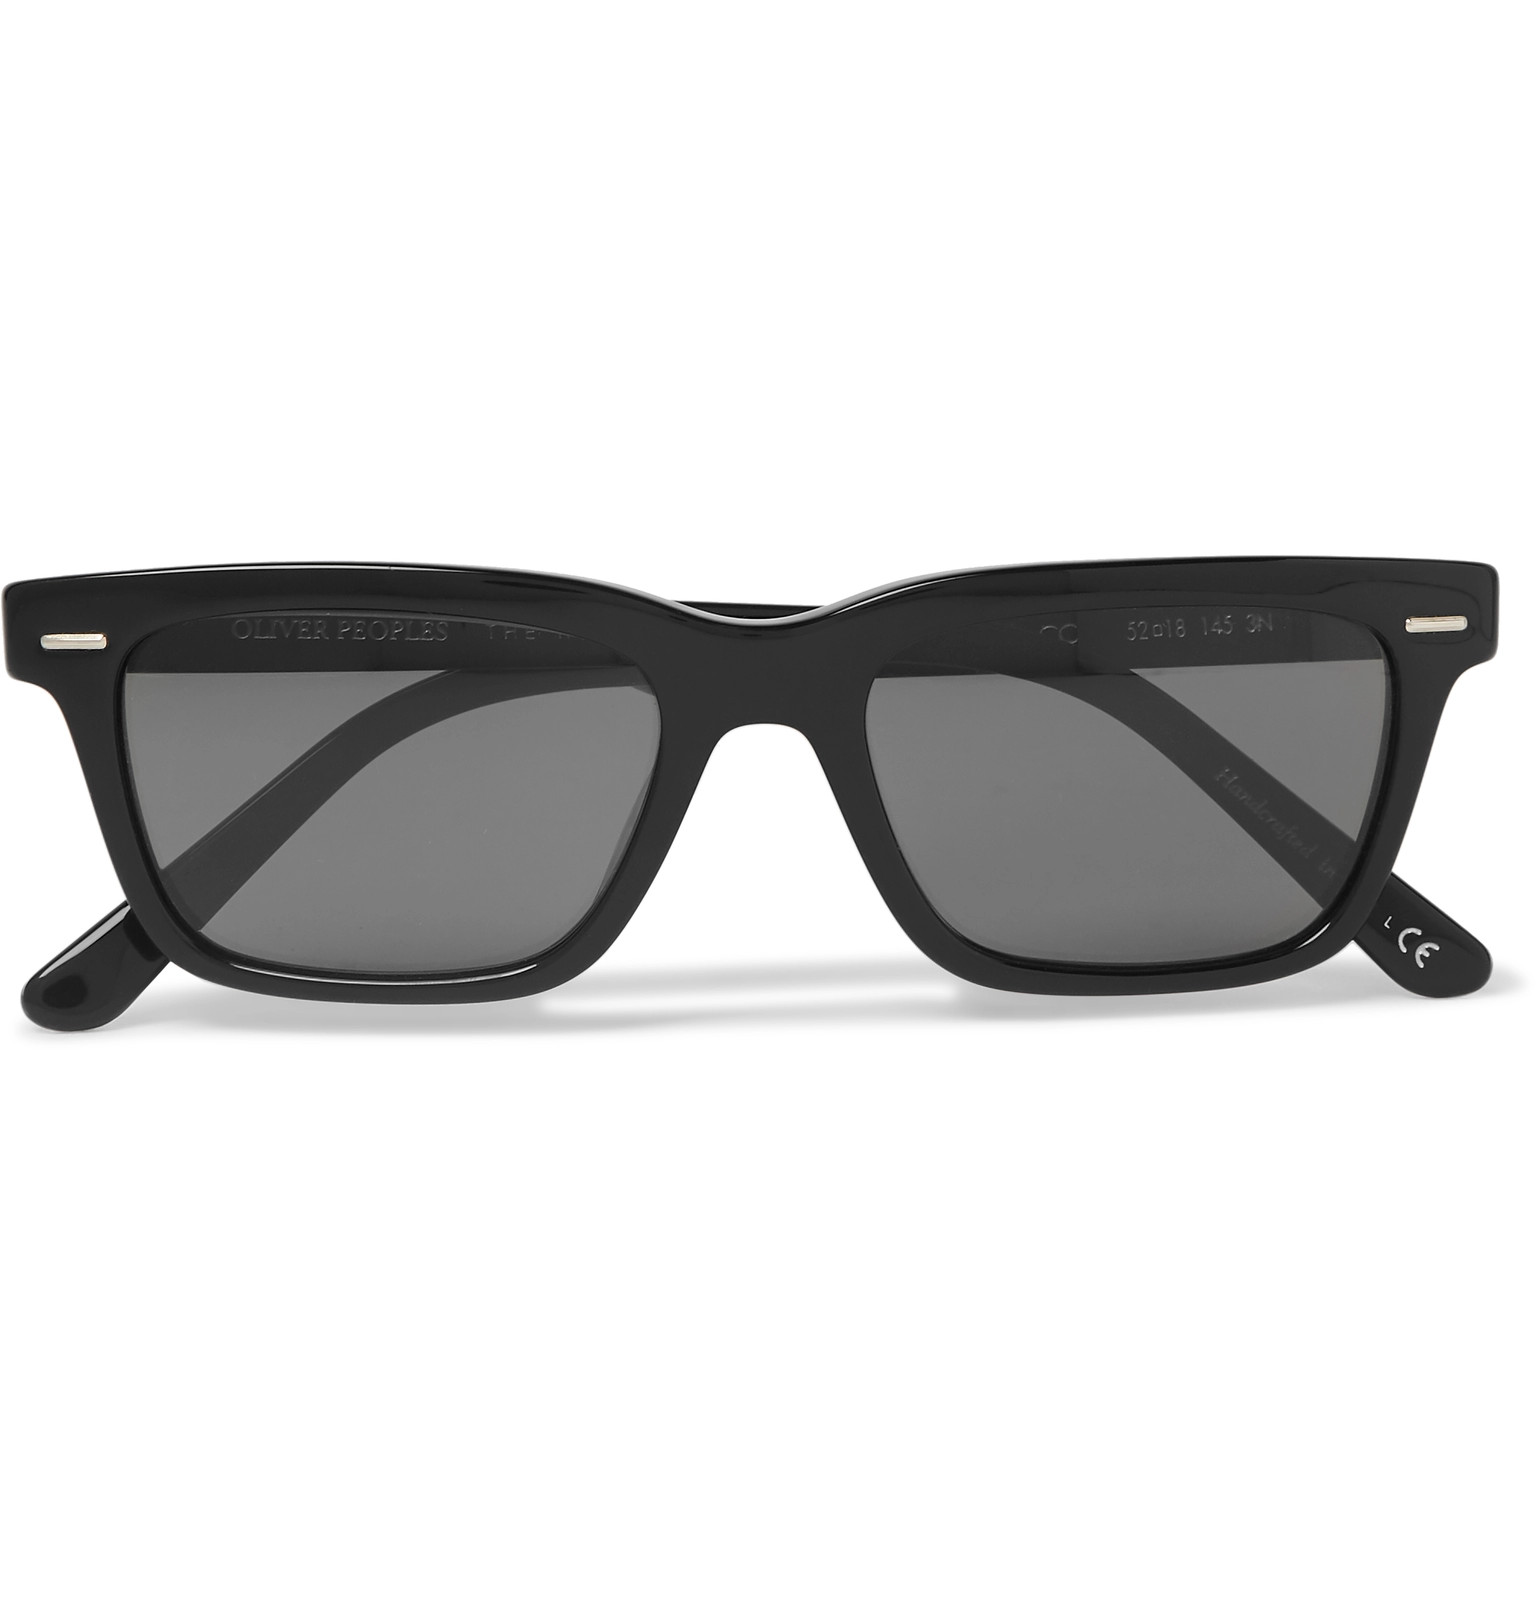 The Row Sunglasses Oliver Peoples Clearance, 58% OFF | www 